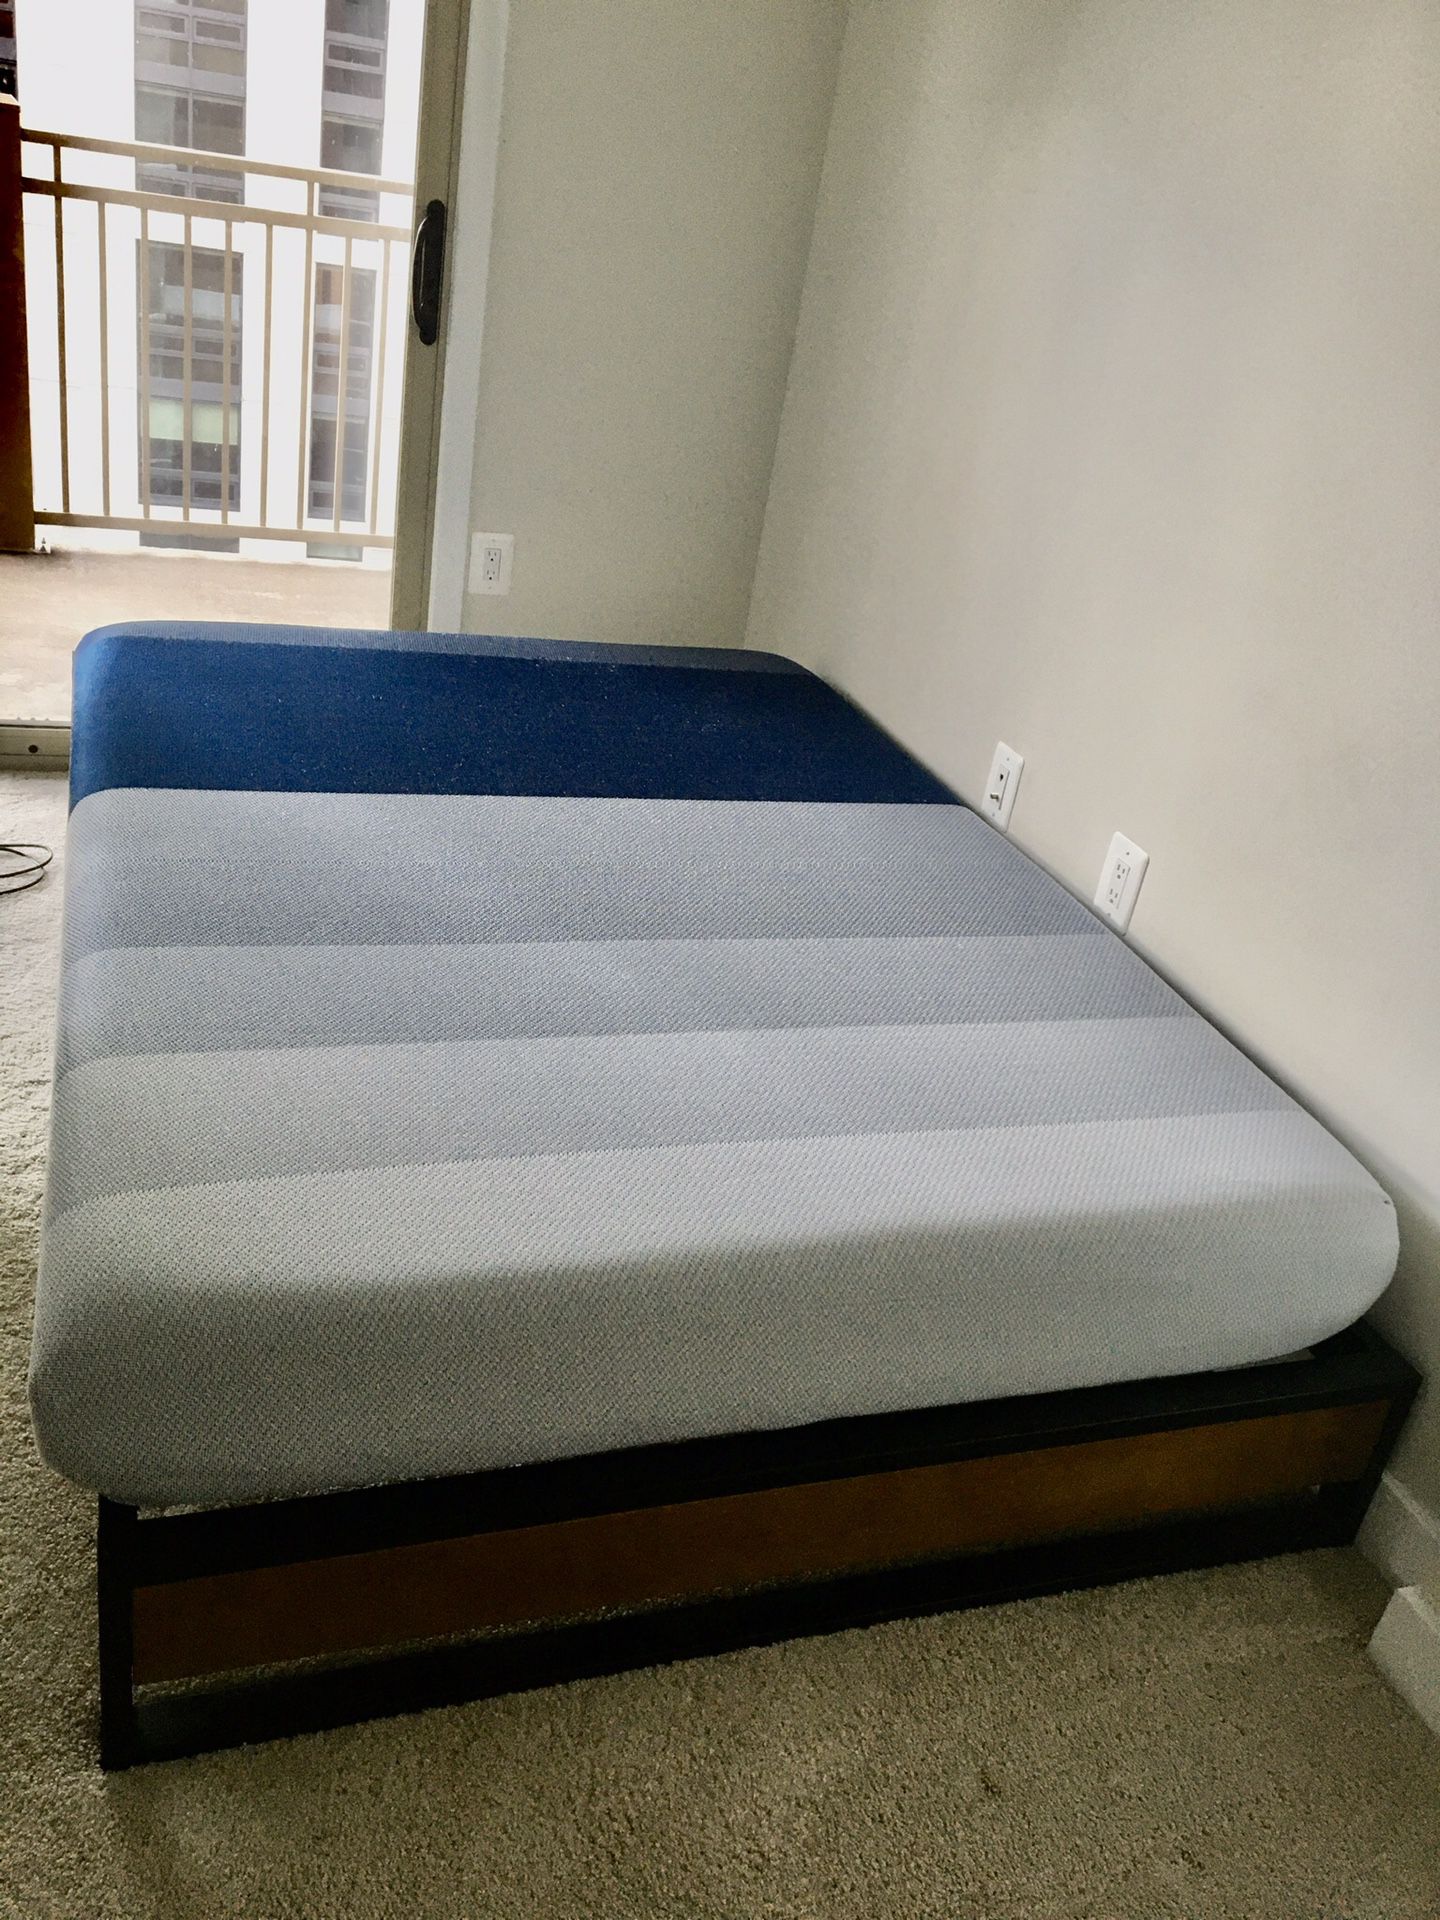 Platform bed frame with full mattress - used only 8 months - moving sale